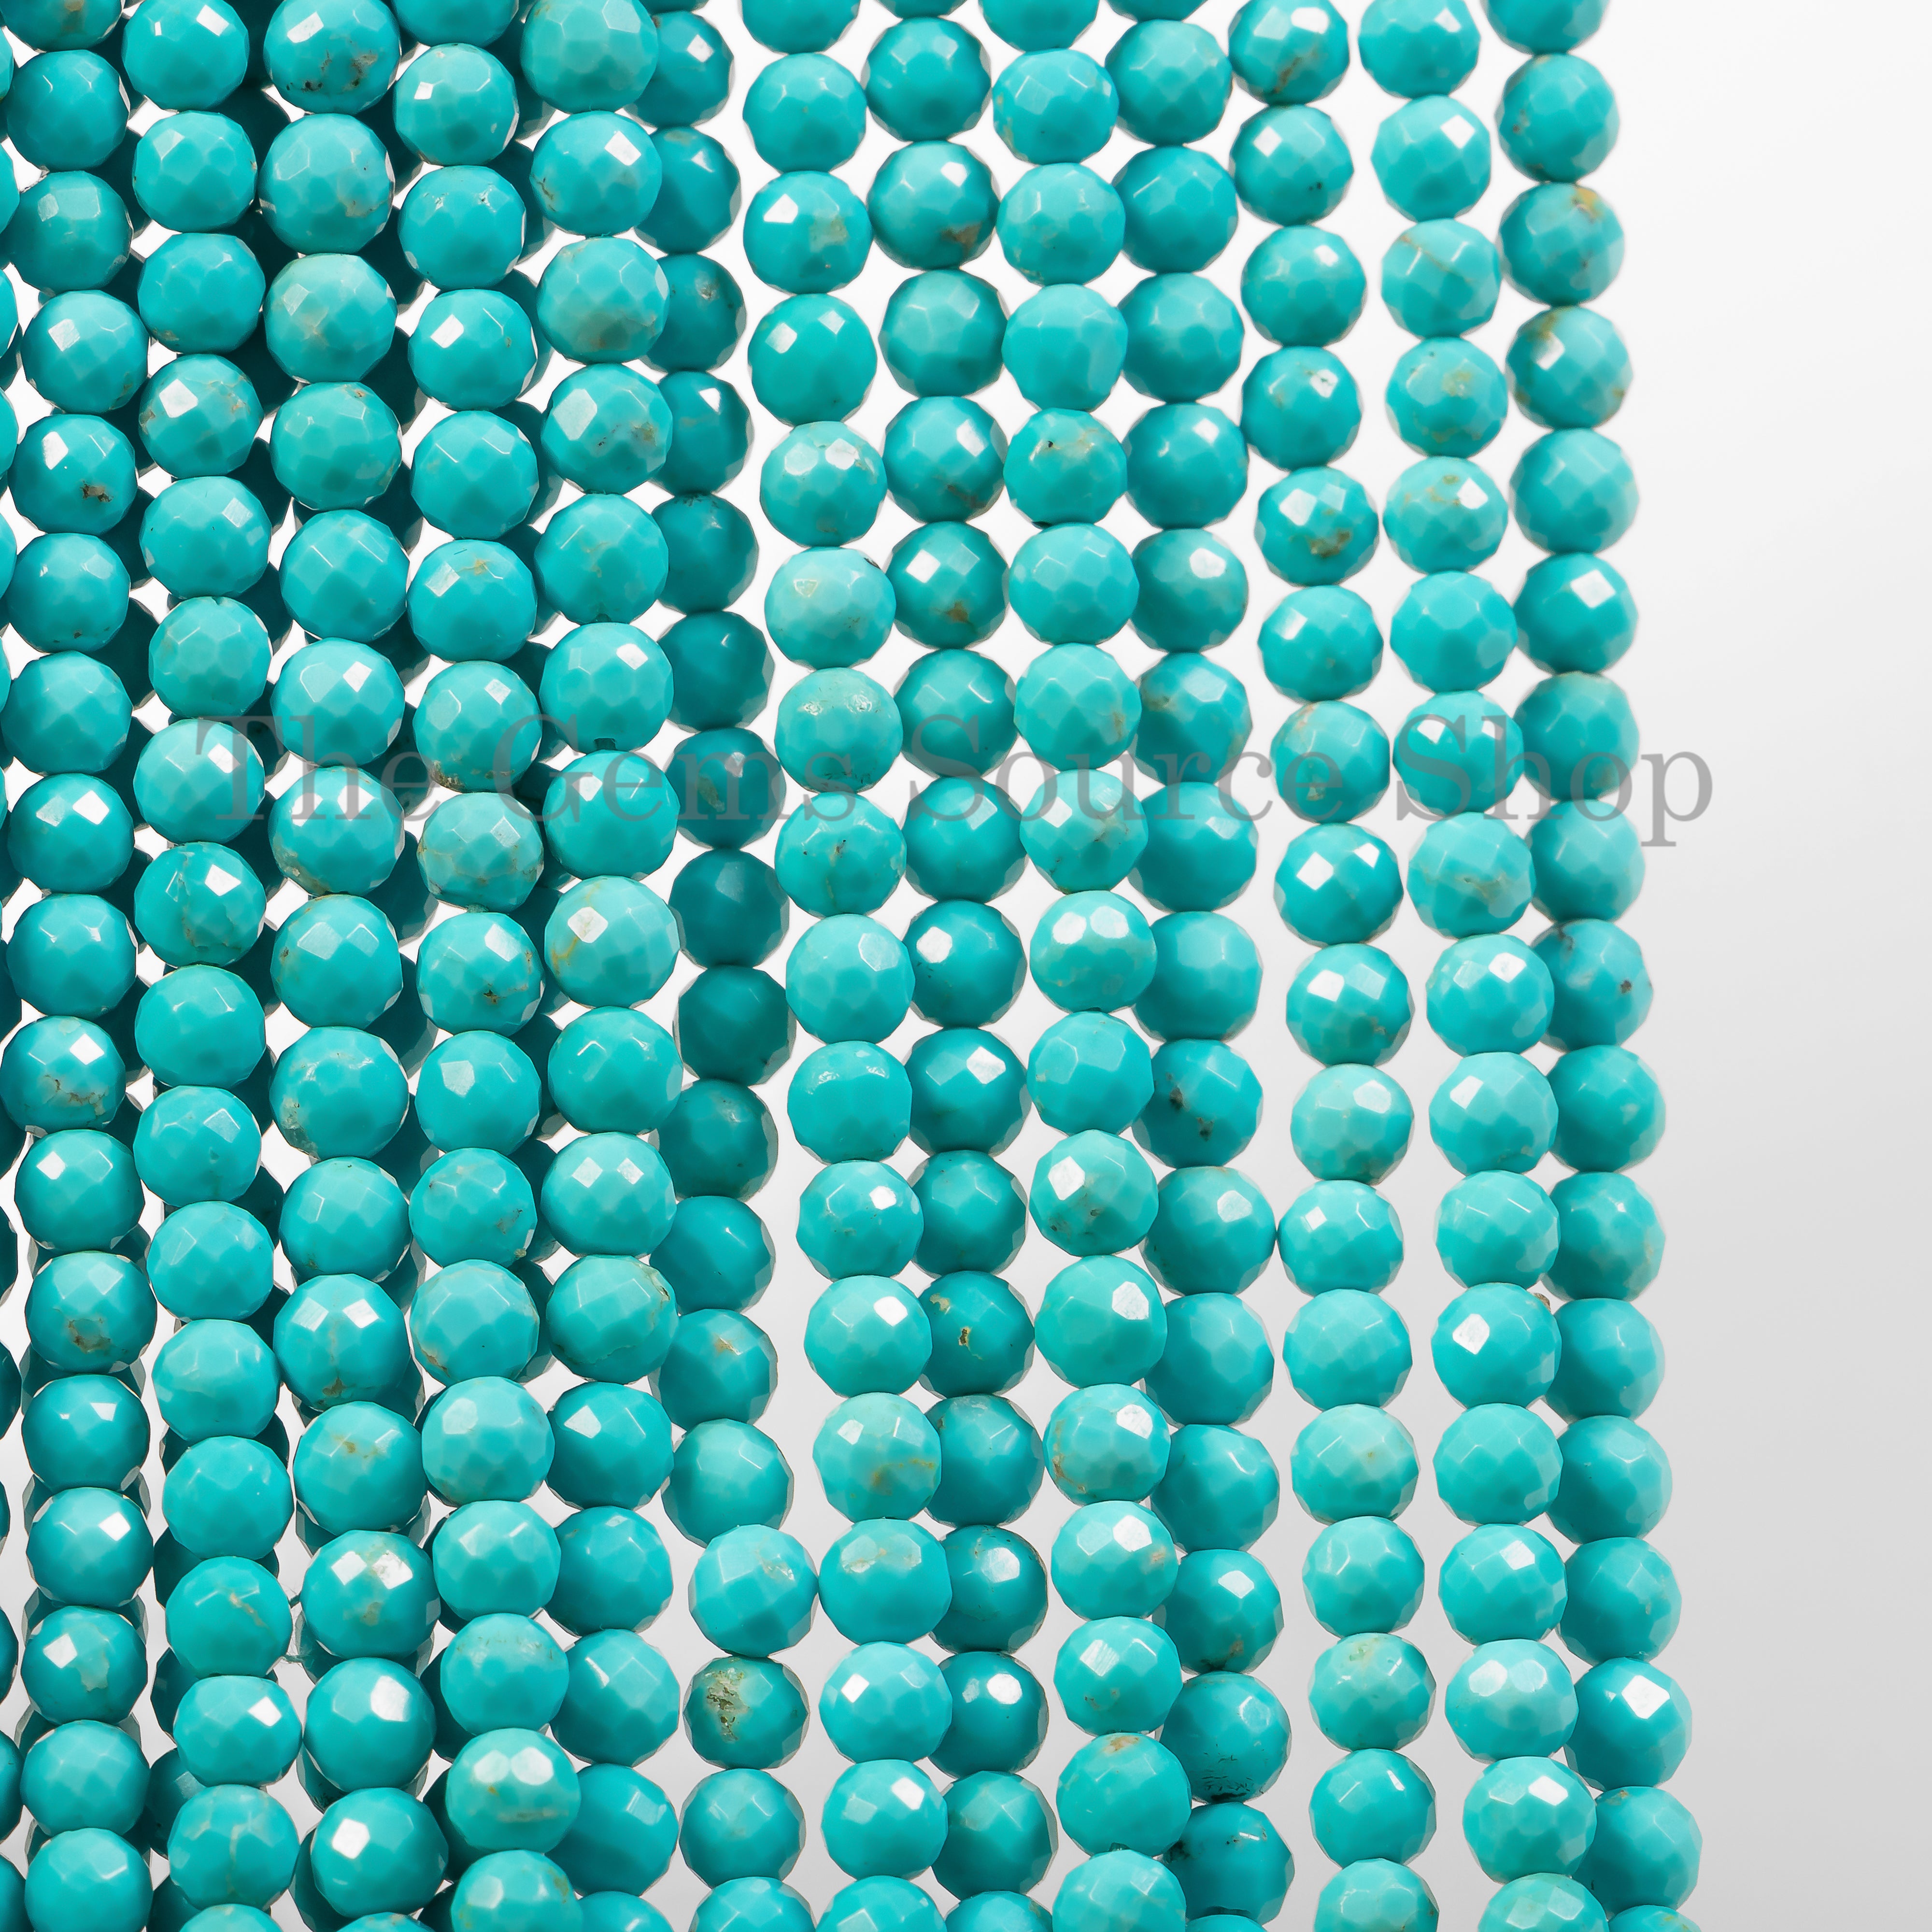 4-4.75 mm Natural Turquoise Faceted Round Beads, Turquoise Balls TGS-4636